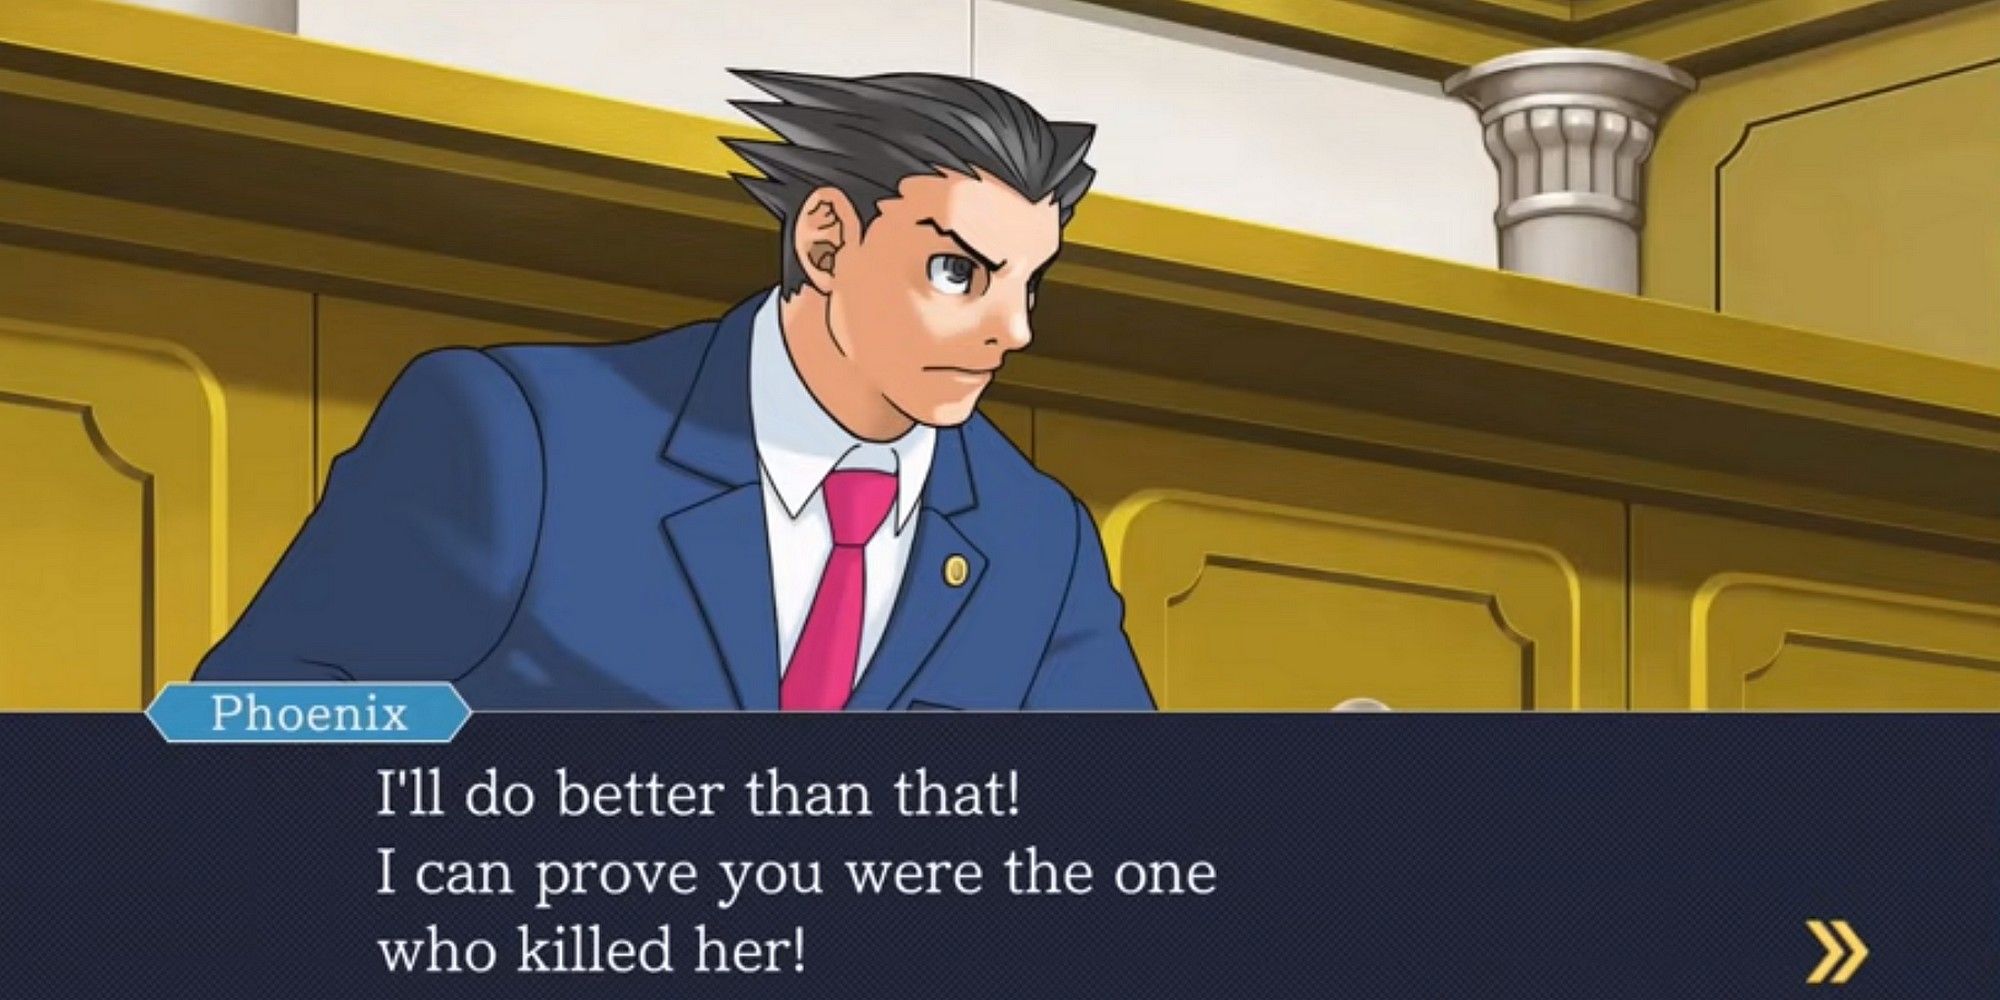 Phoenix Wright stares down a suspect inside a courtroom in Ace Attorney: Phoenix Wright.